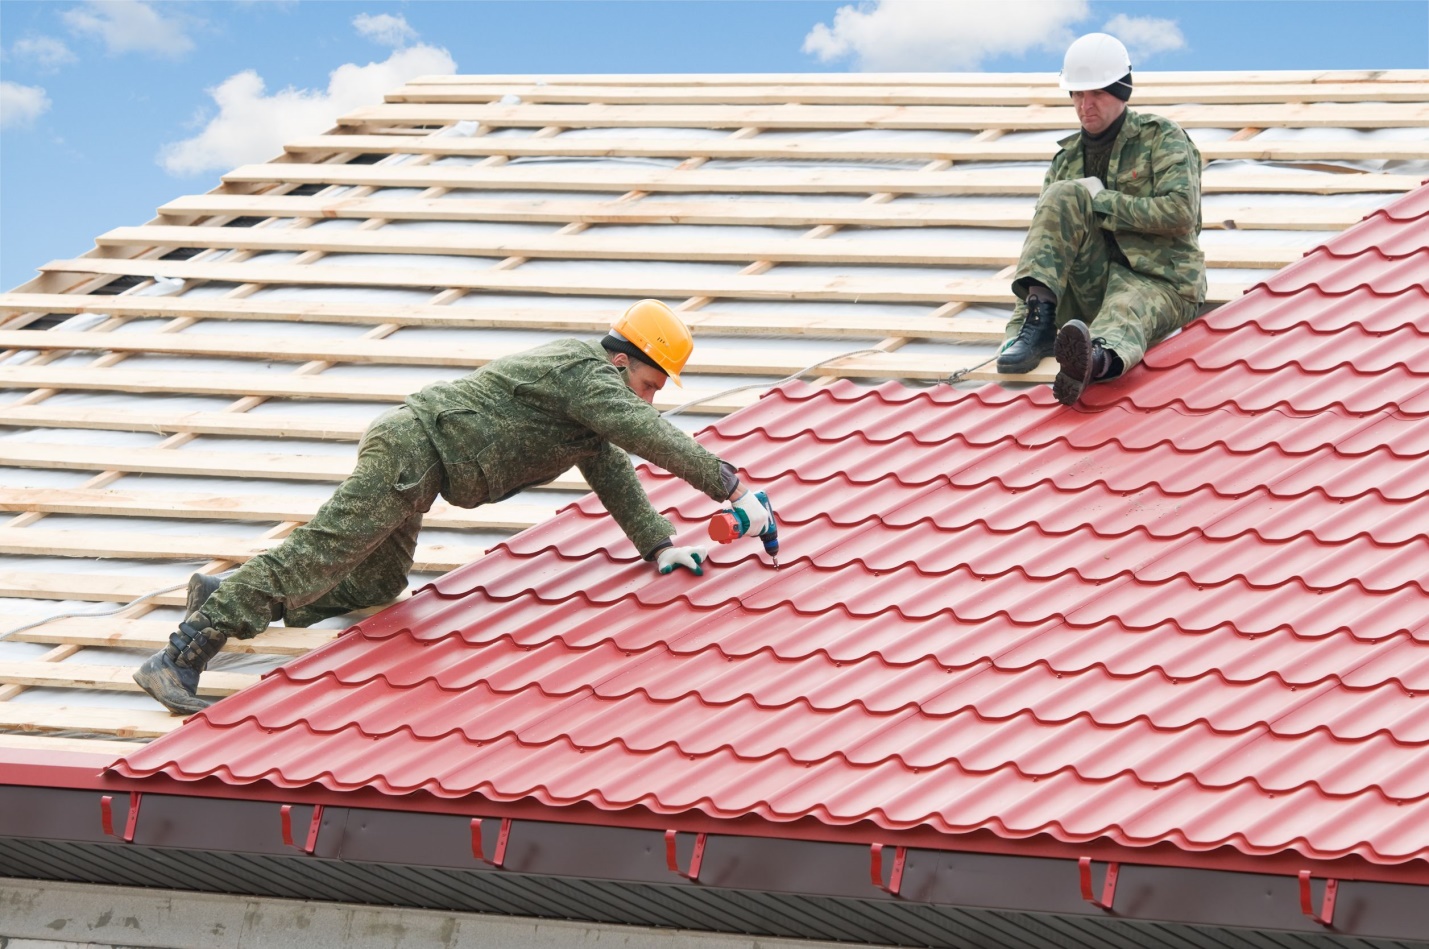 How To Replace Roof Tiles On Your Own